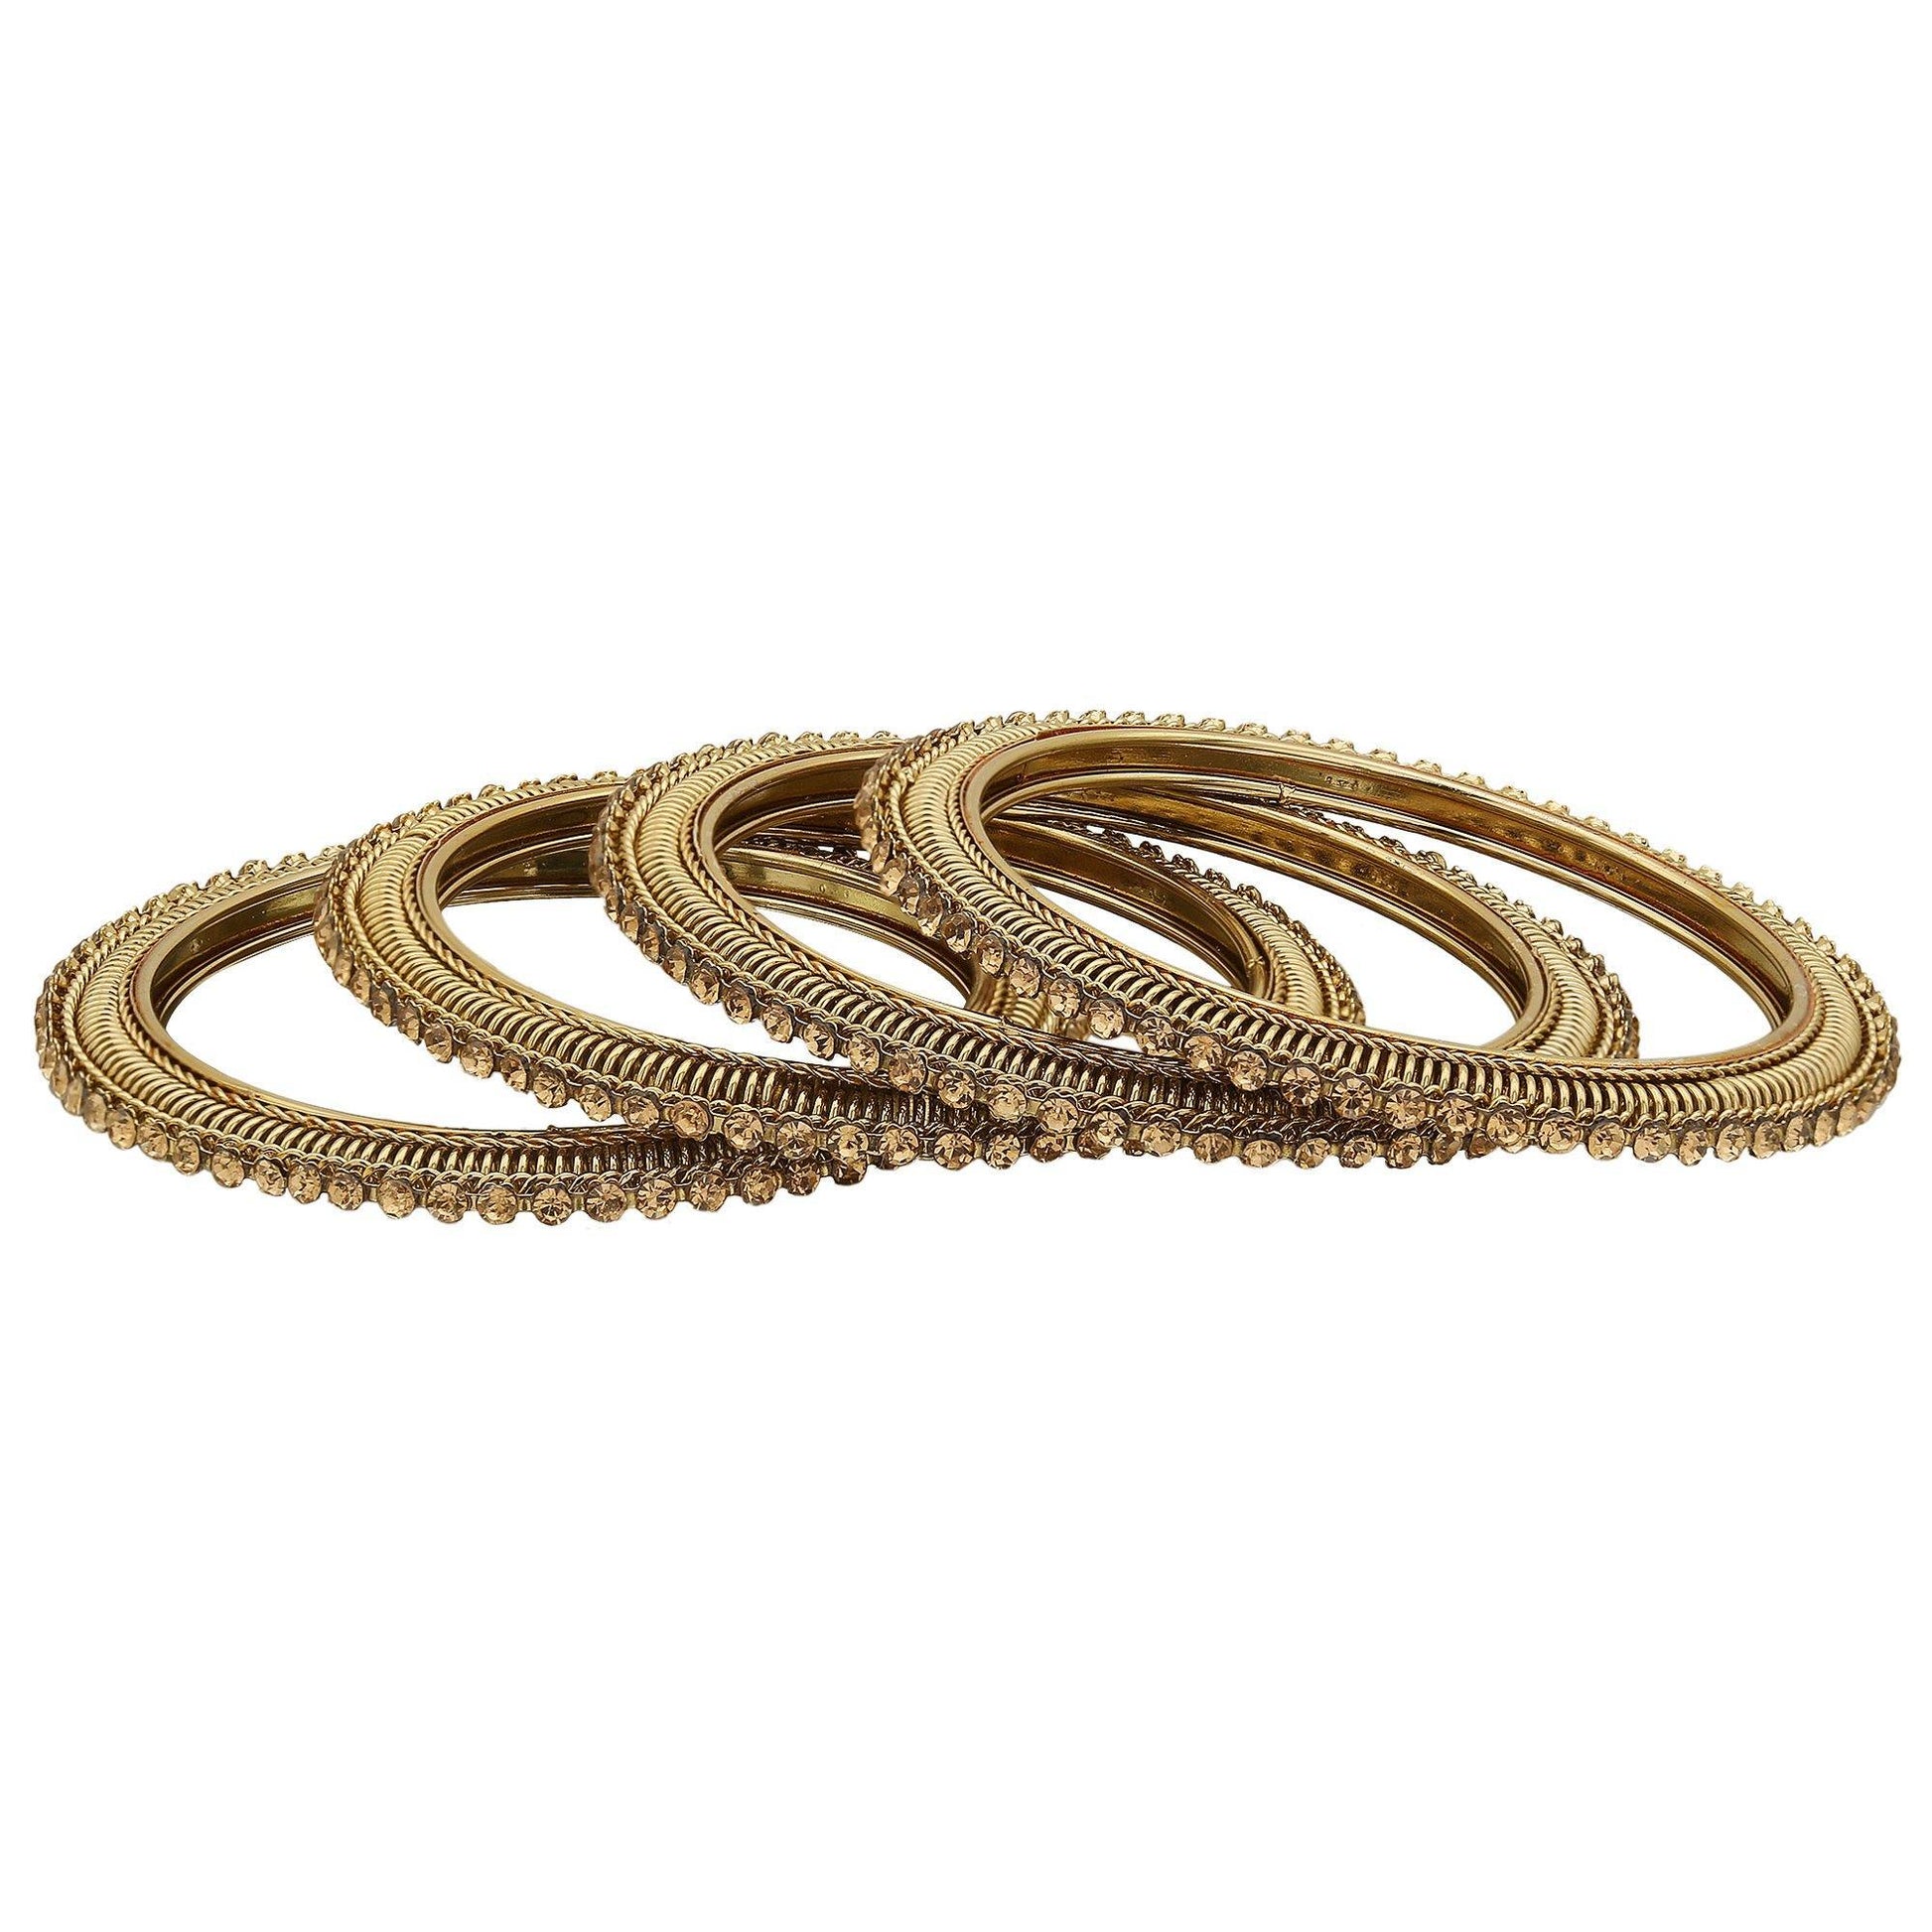 sukriti indian handcrafted gold tone gold bangles party wear jewelry for women & girls - set of 4